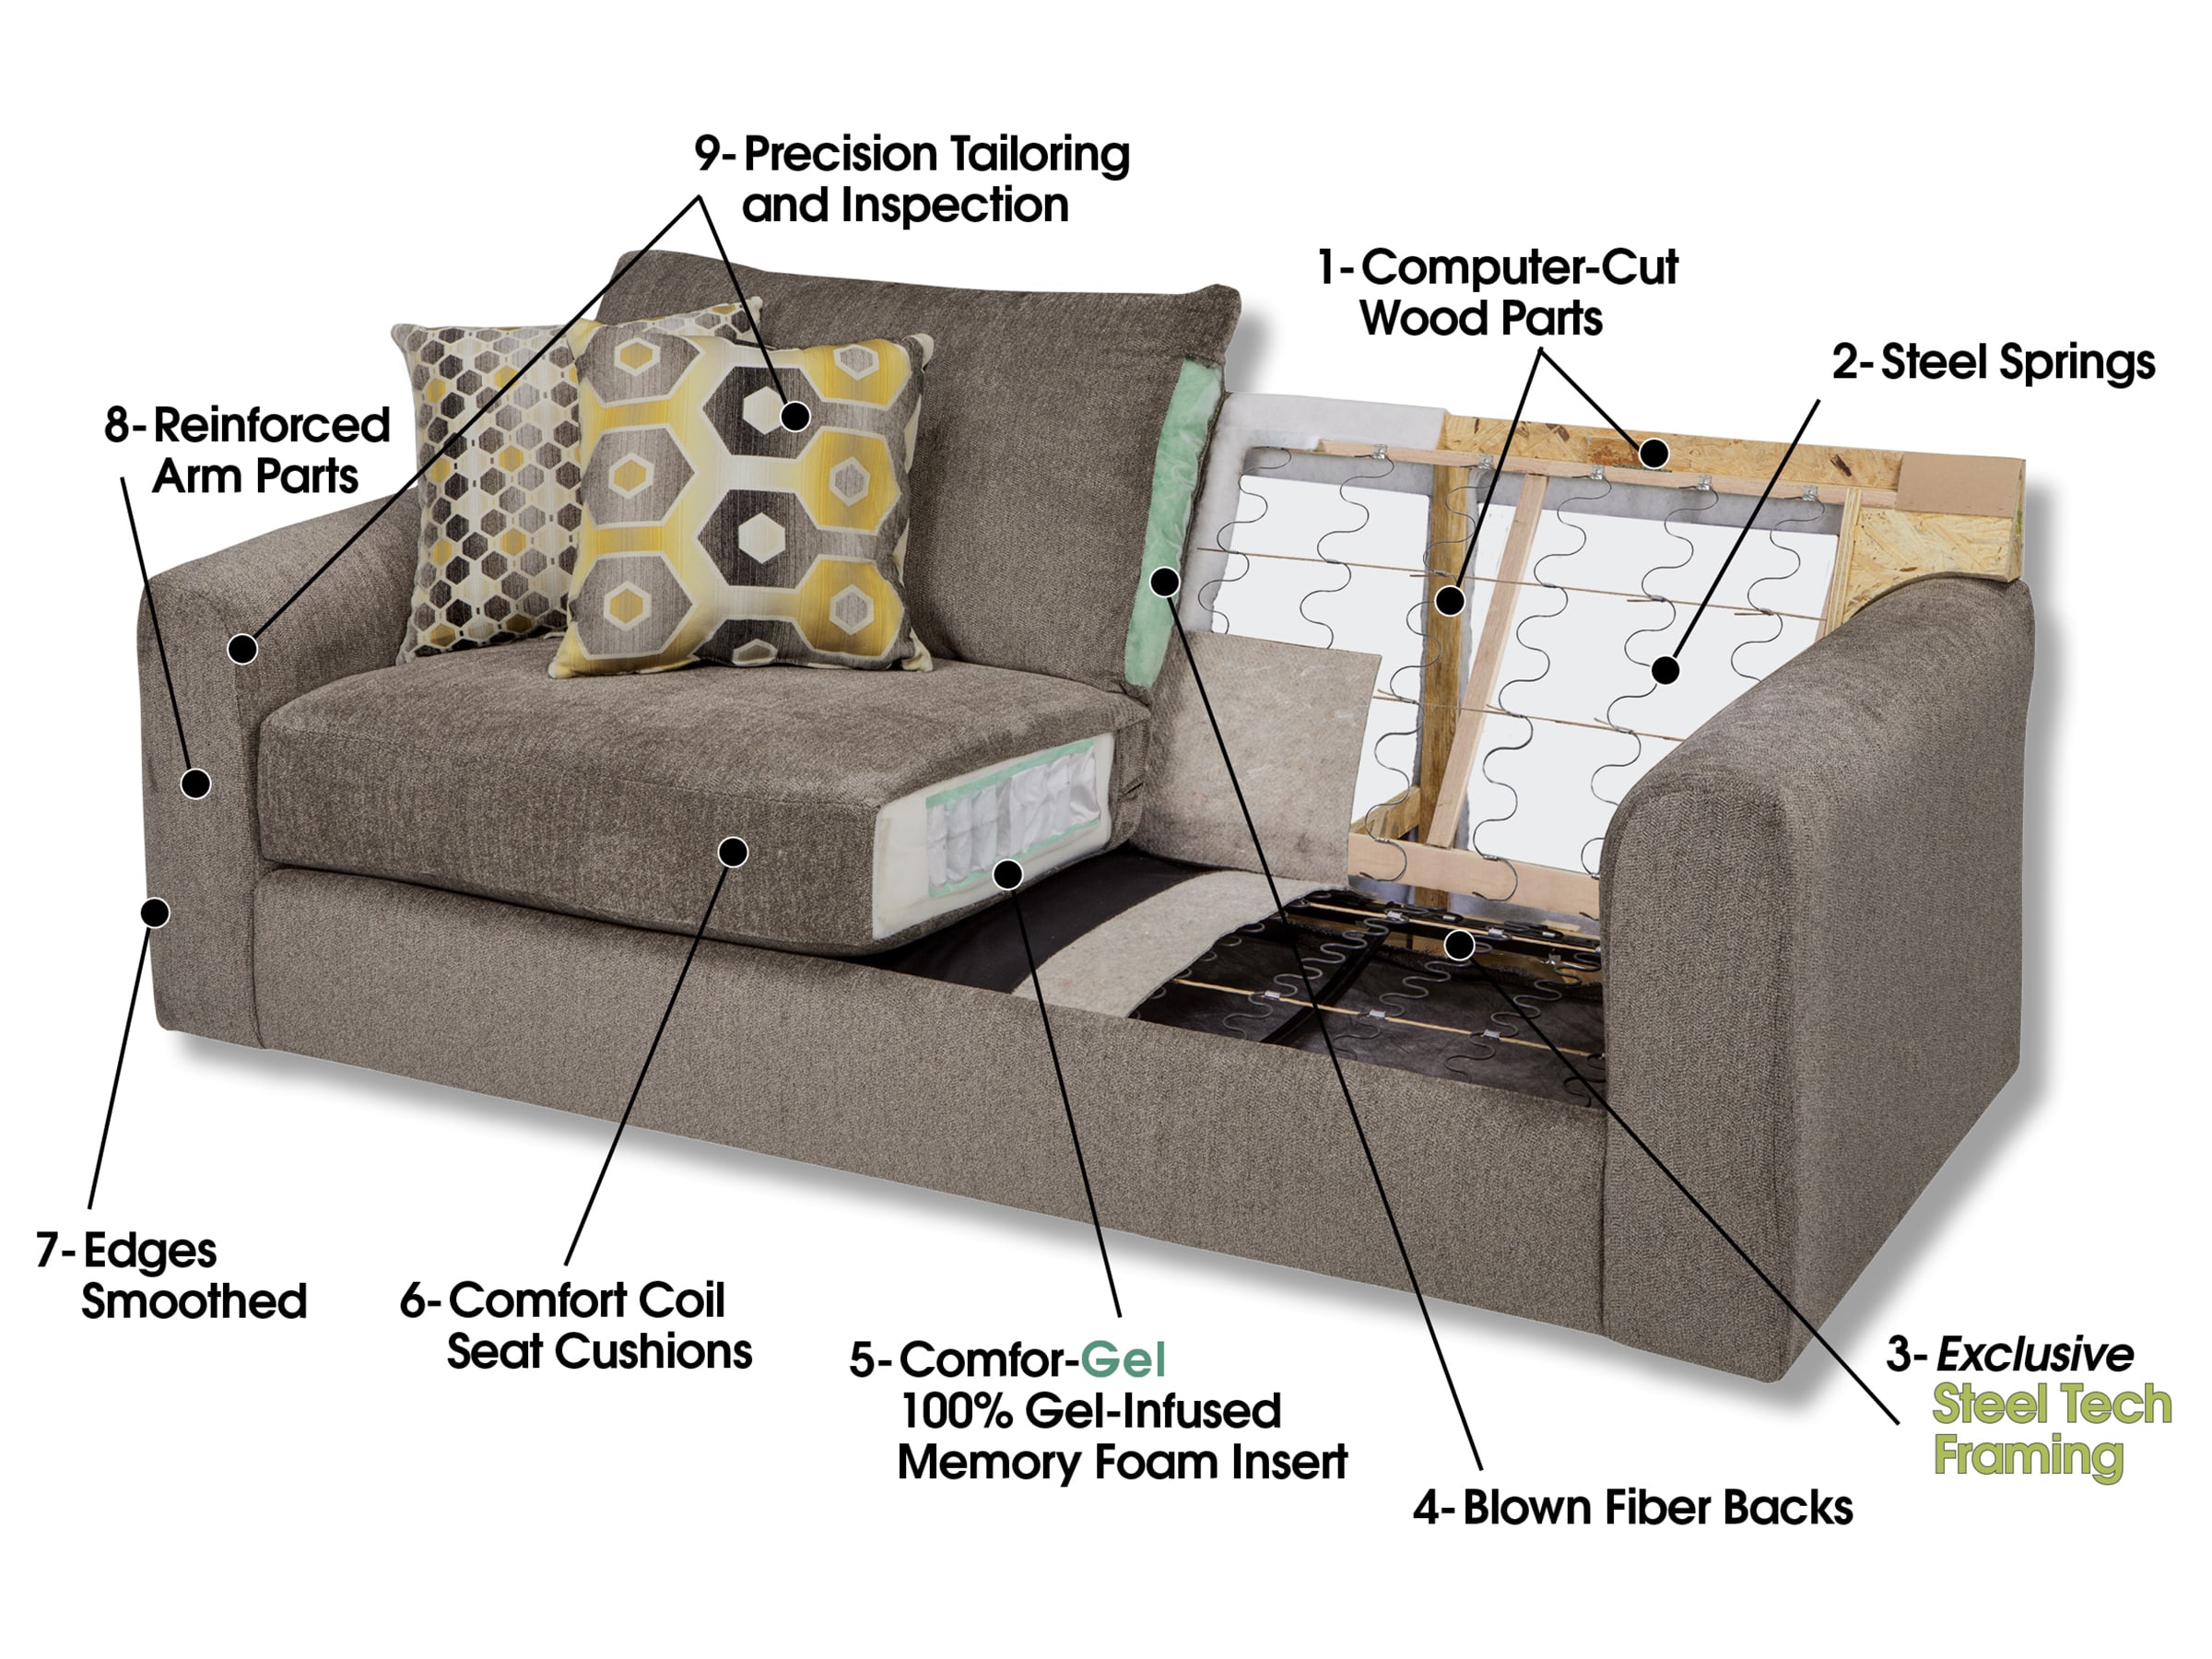 Parts of the Sofa